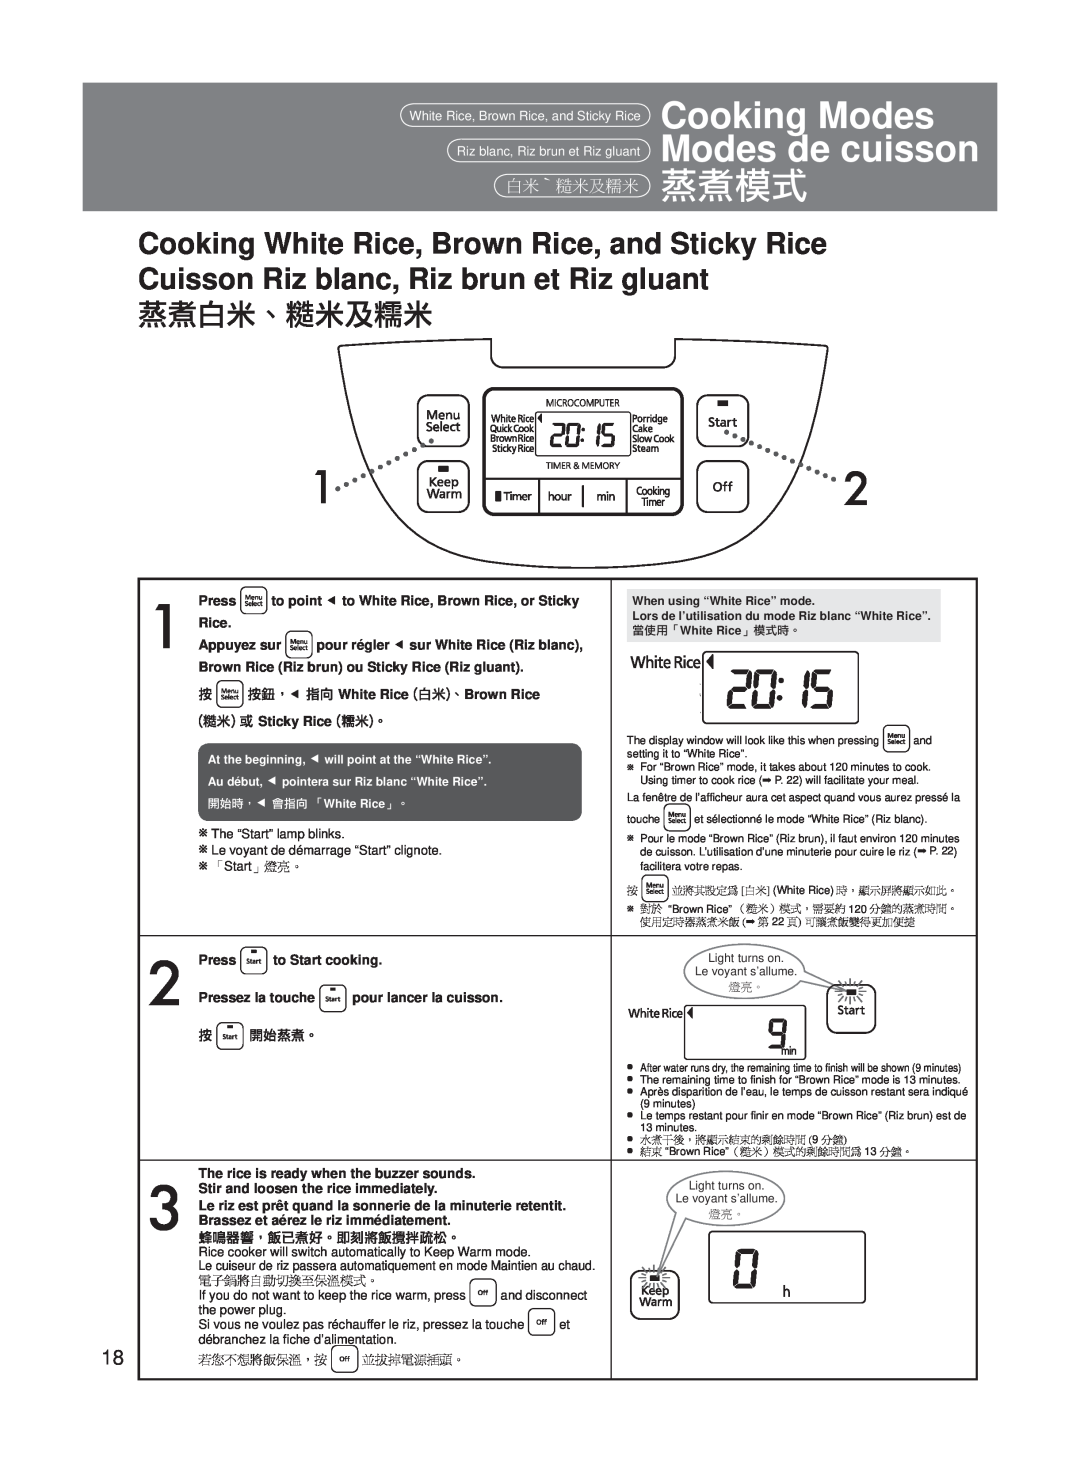 Panasonic SRMS103, SRMS183 operating instructions 蒸煮模式, Cooking Modes Modes de cuisson, 白米‵糙米及糯米 